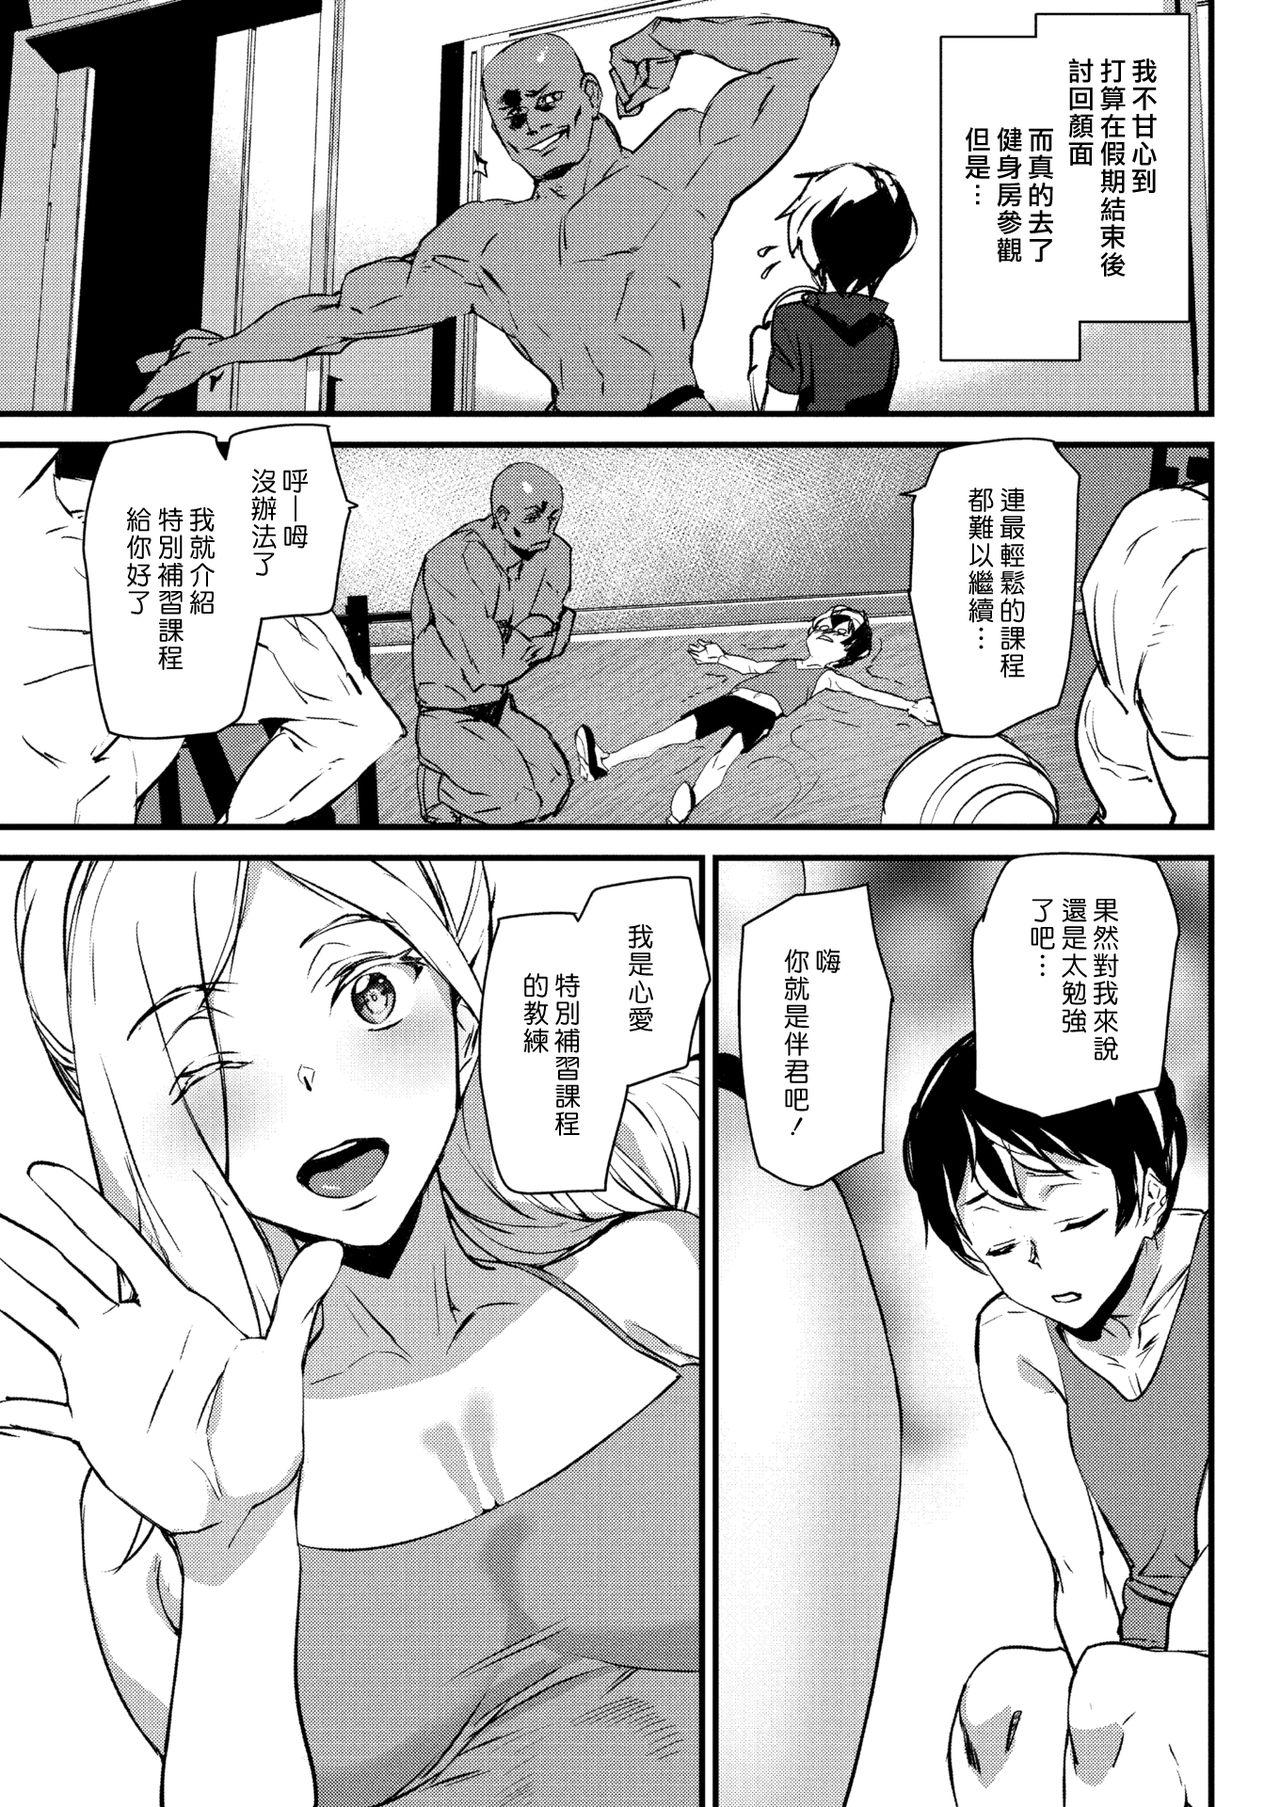 Mexico Work Out! | 鍛鍊！ Dicksucking - Page 3